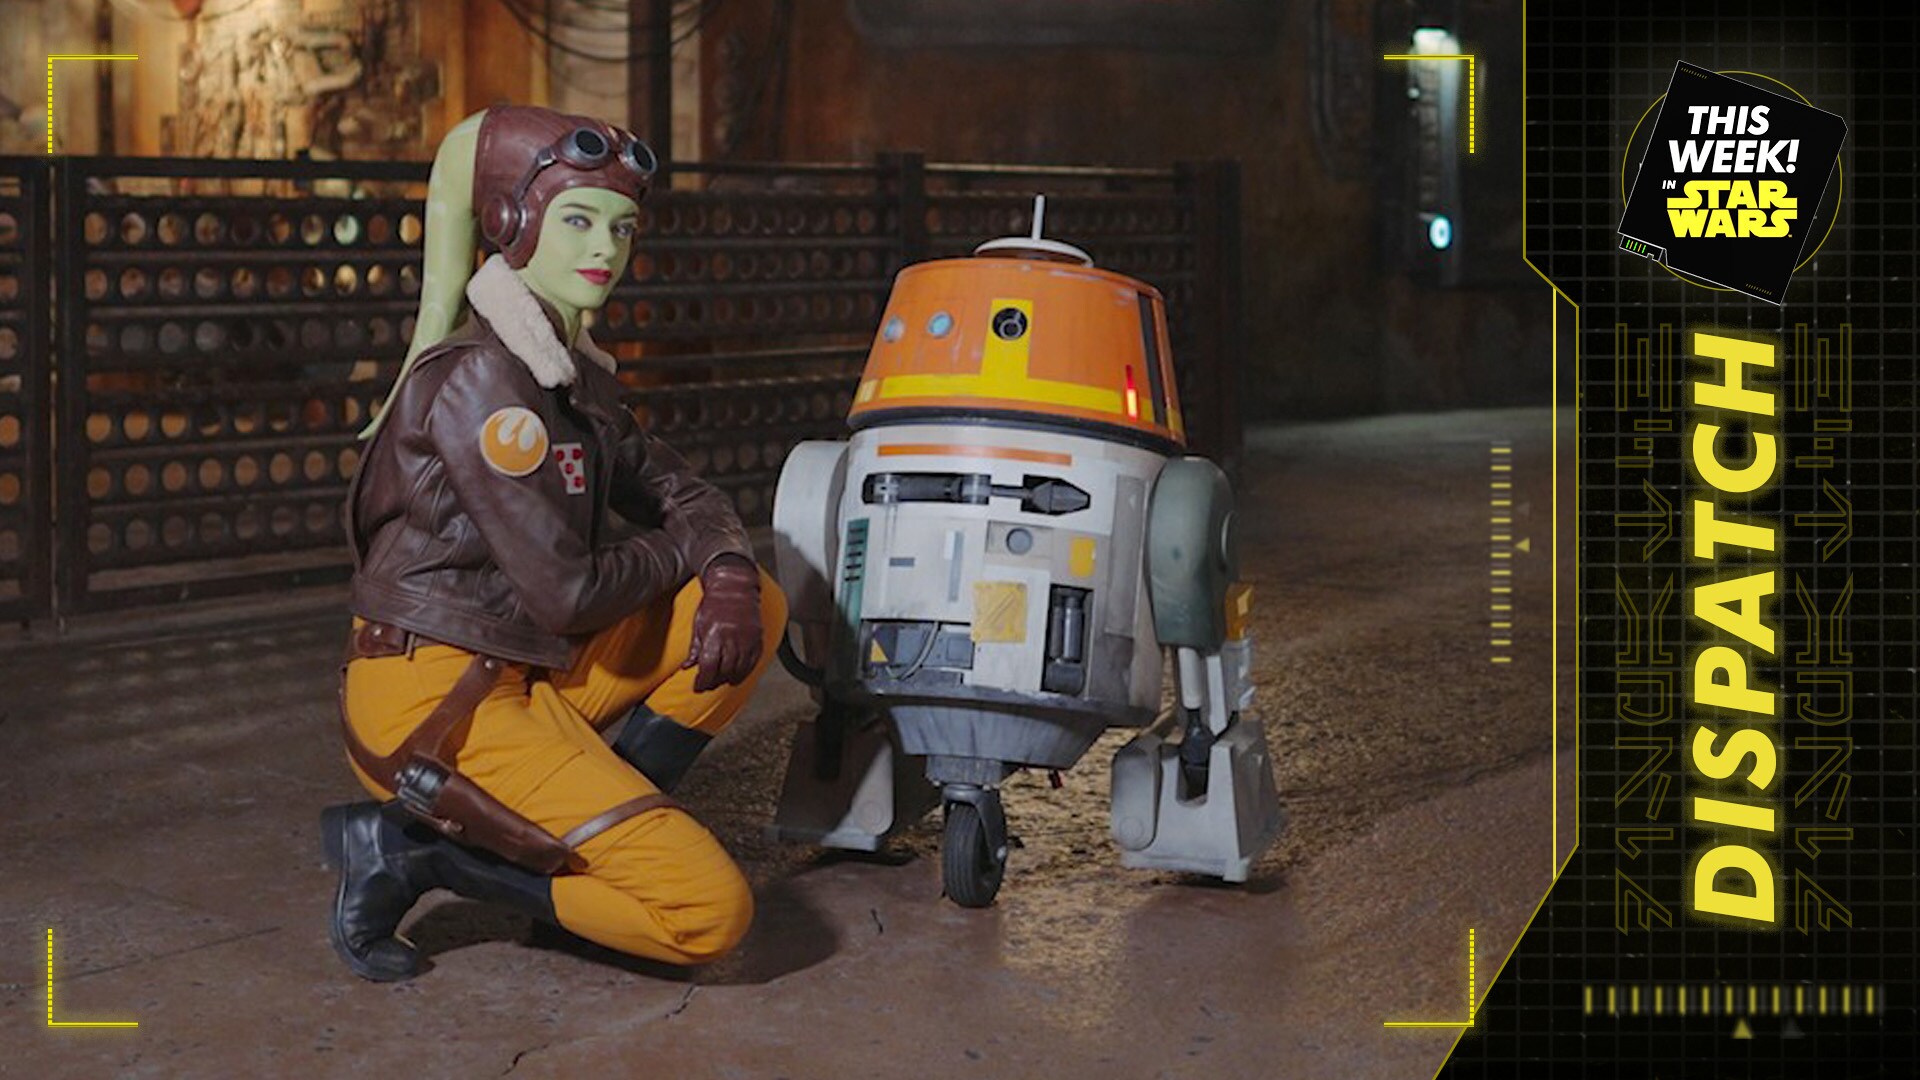 Hera Syndulla Arrives in Galaxy's Edge | This Week! in Star Wars Dispatch thumbnail